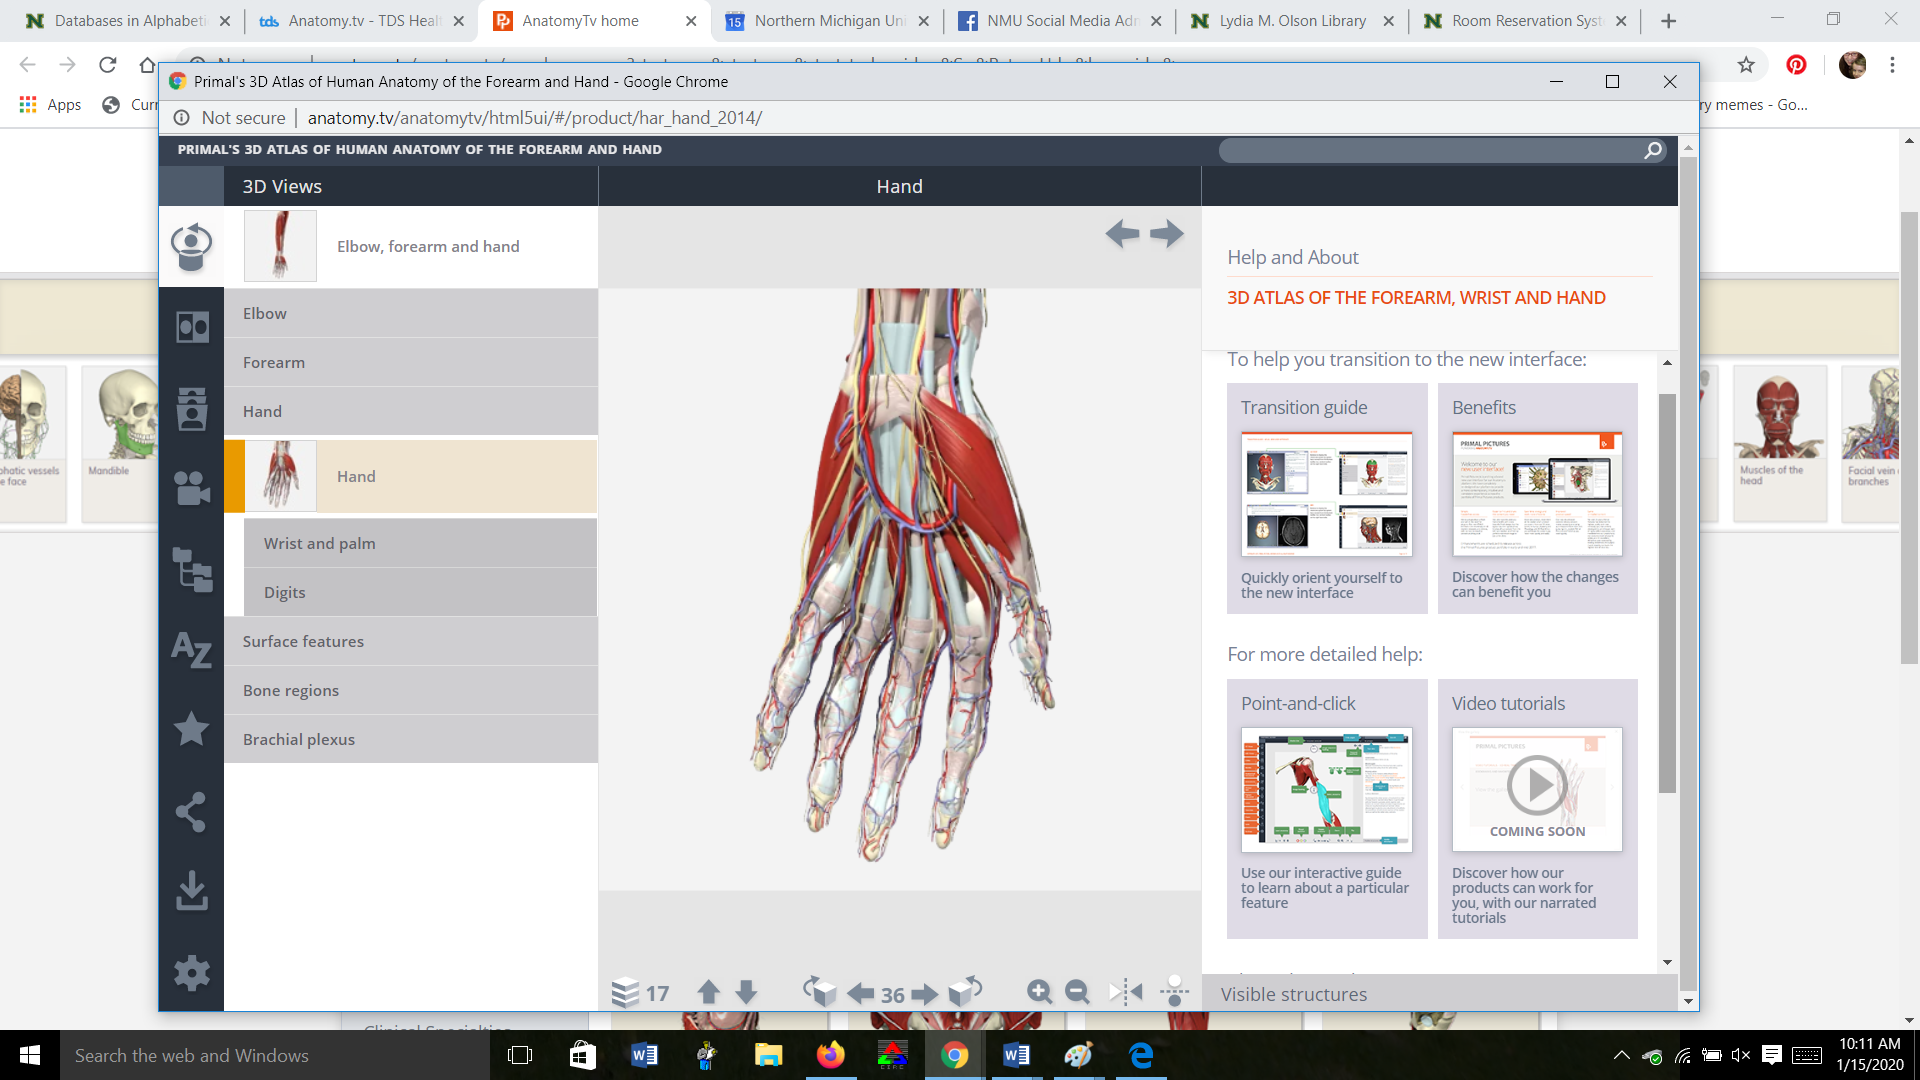 Web page on Anatomy.TV; image of the structures of the human hand